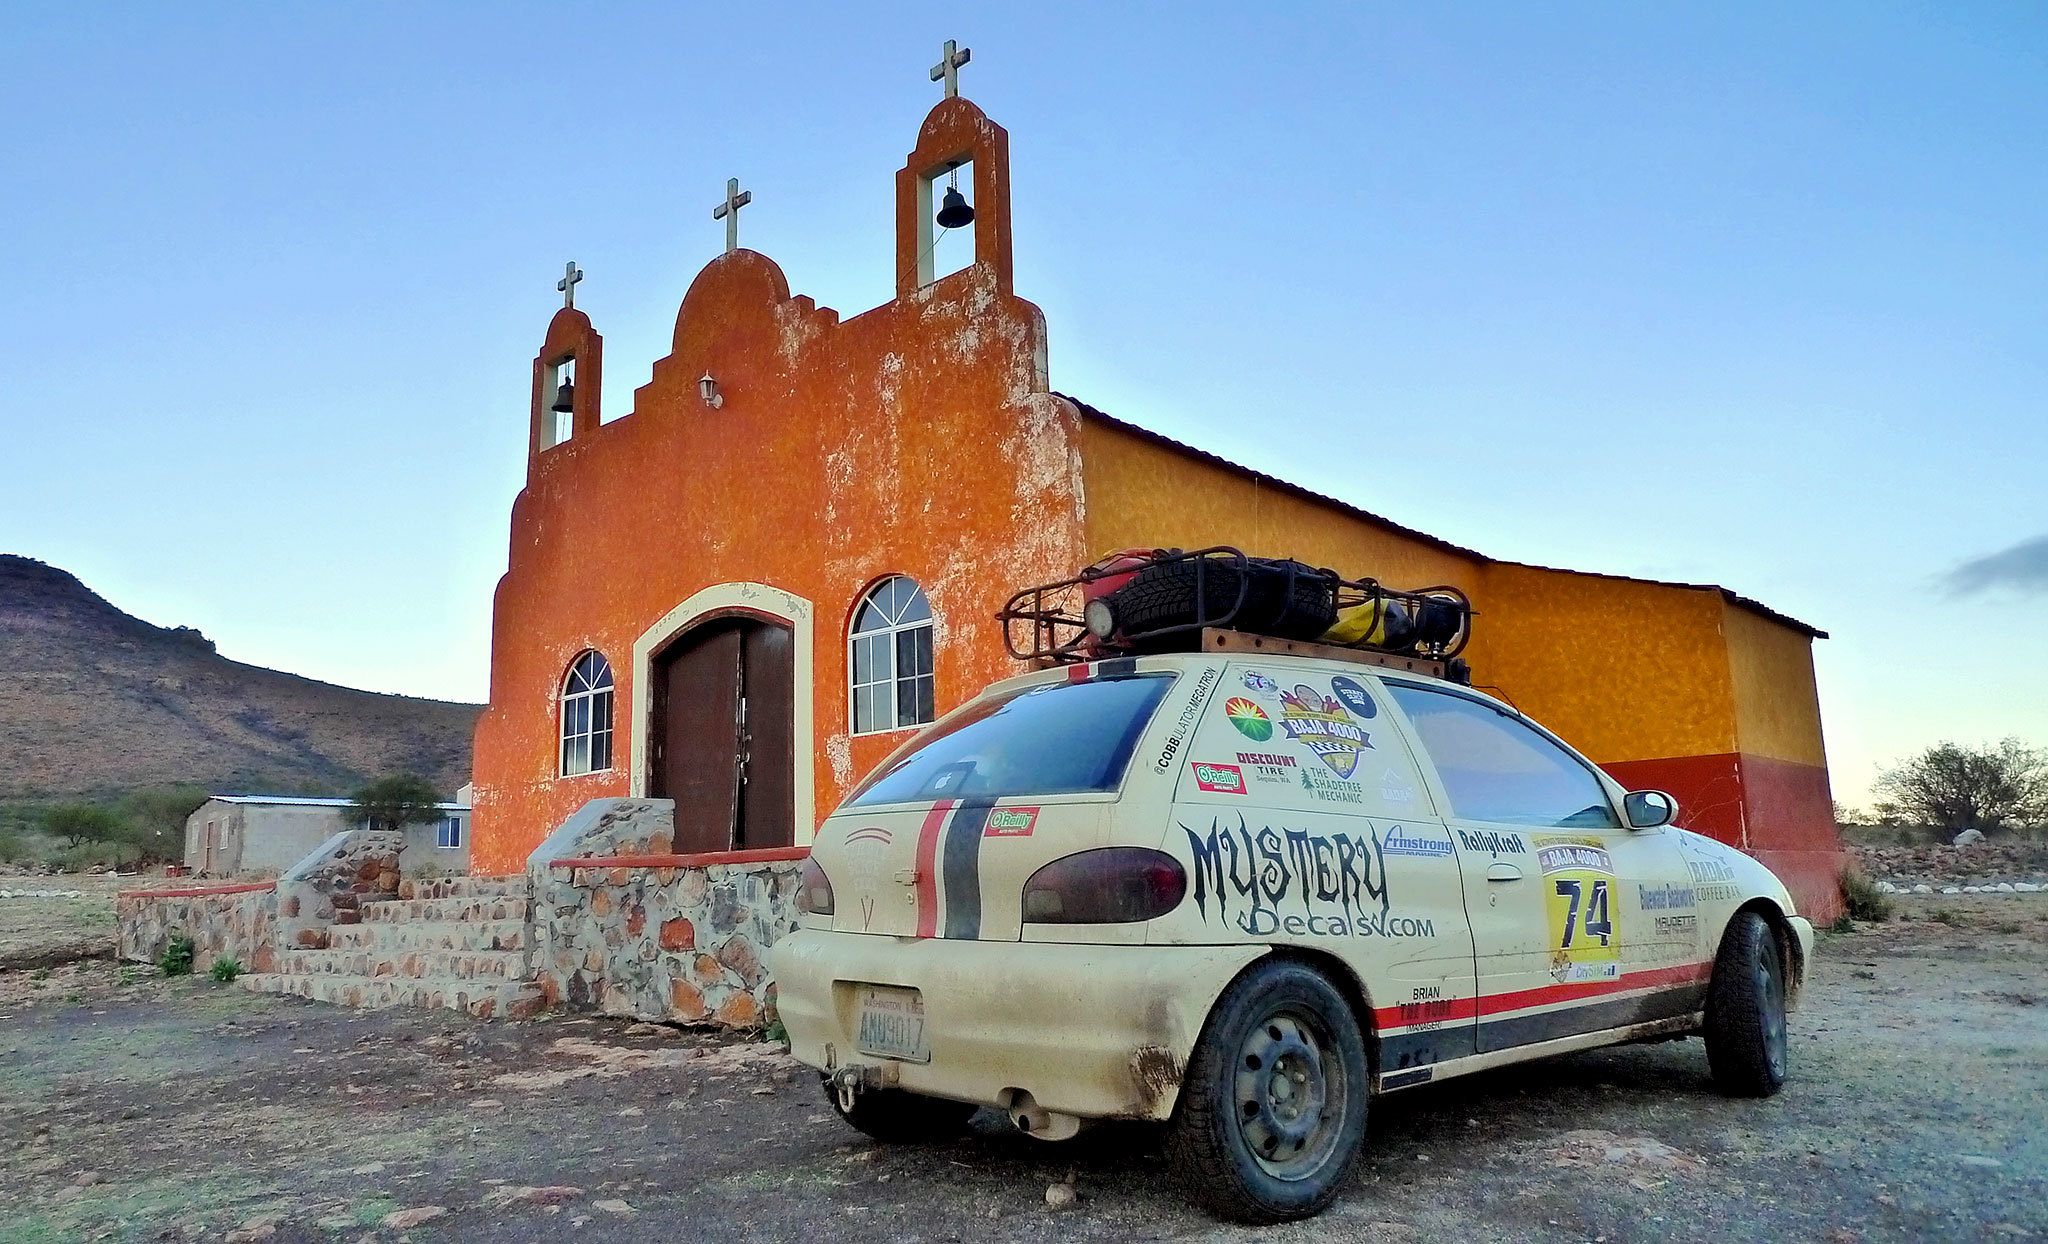 The Port Angeles team of Andy Audette and Nason Beckett and their 2000 Chevy Metro “Pepito” make a stop at an old mission at Sierrade San Francisco in the mountains of Baja California during the Baja 4000 Race.